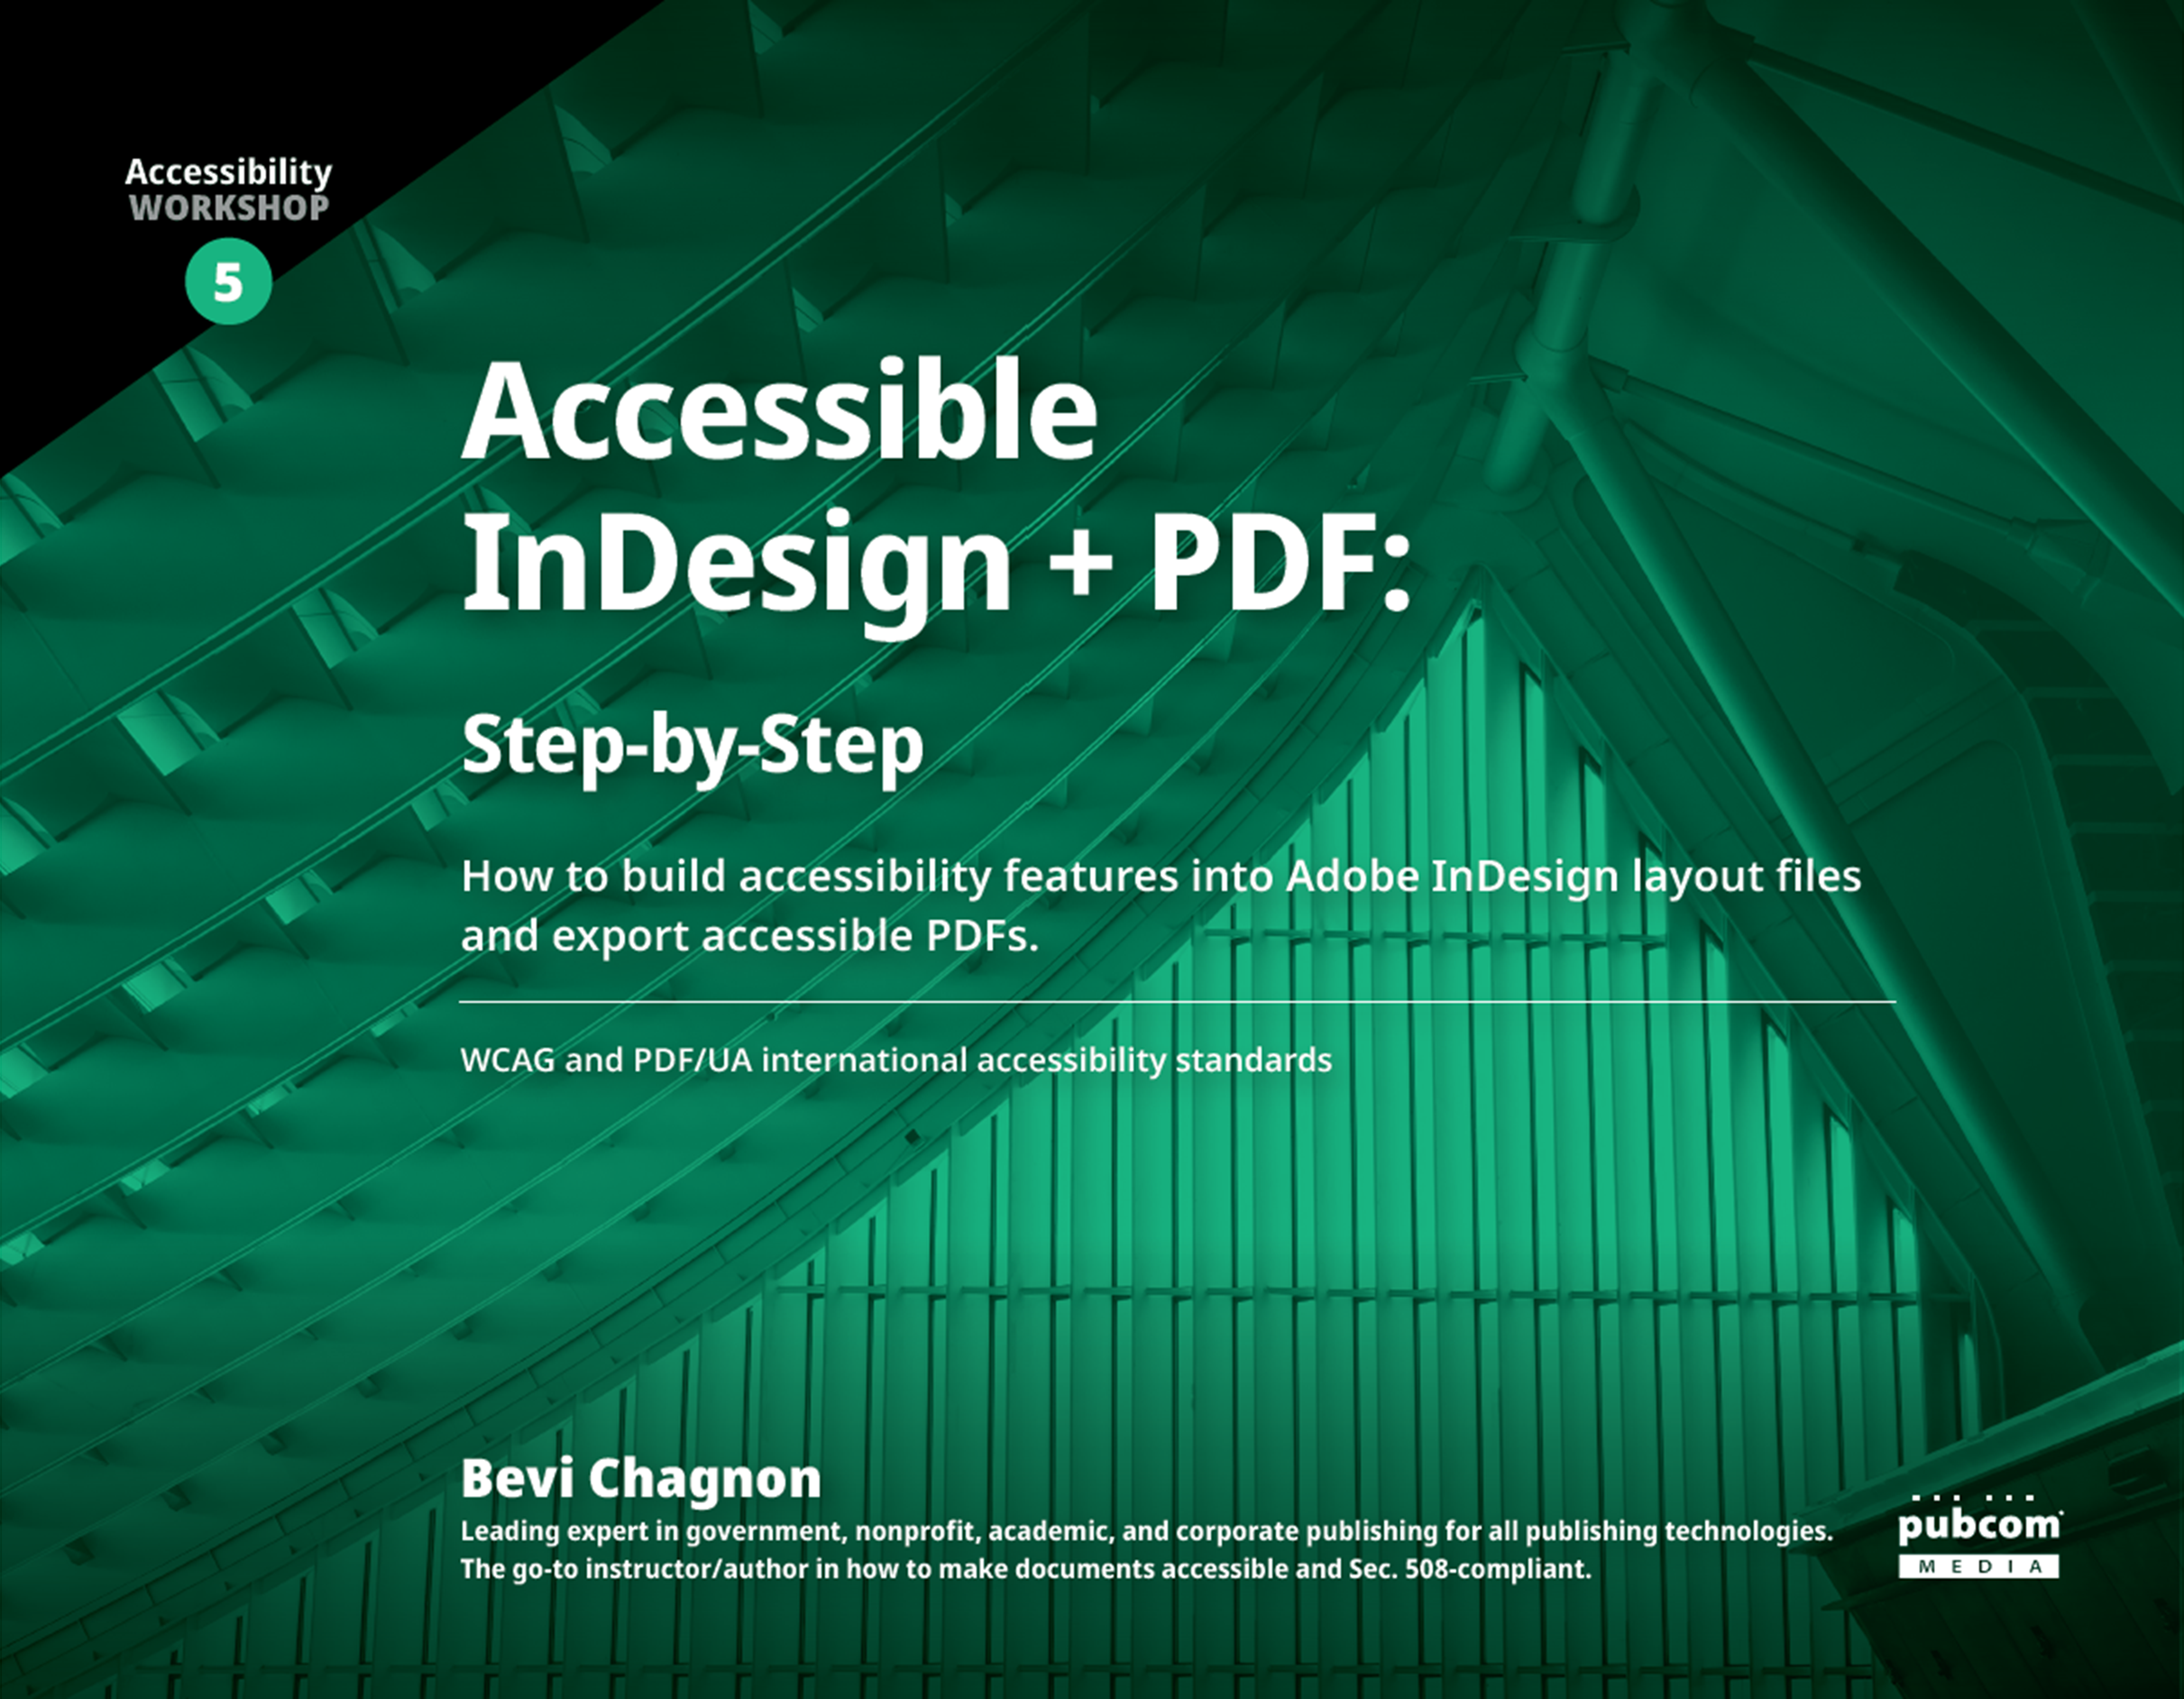 Book cover, Accessible InDesign Plus PDF.